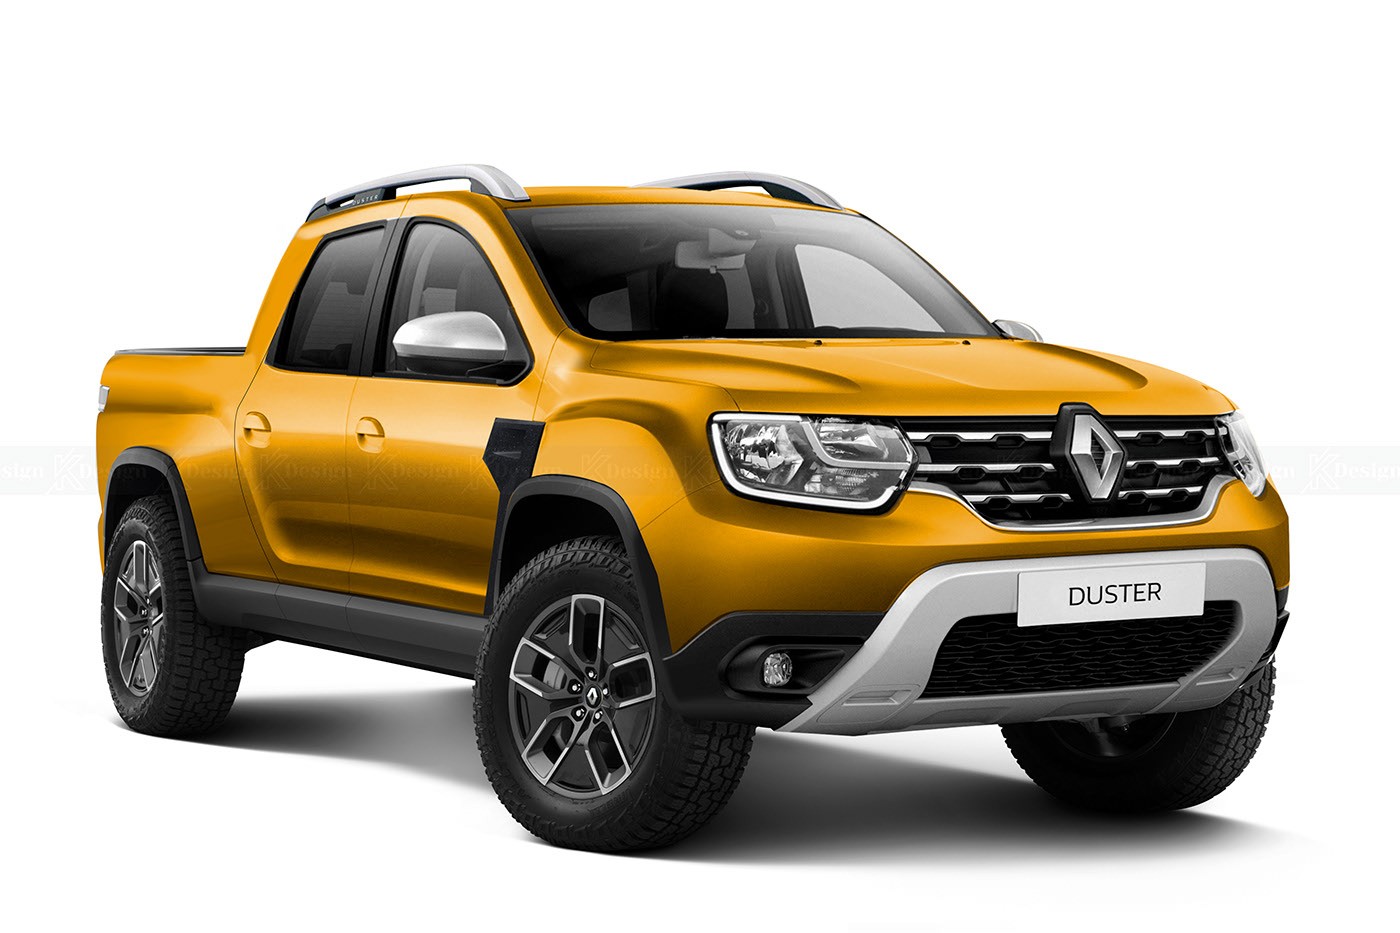  2022  Renault Duster  Oroch  Rendered With Contemporary 